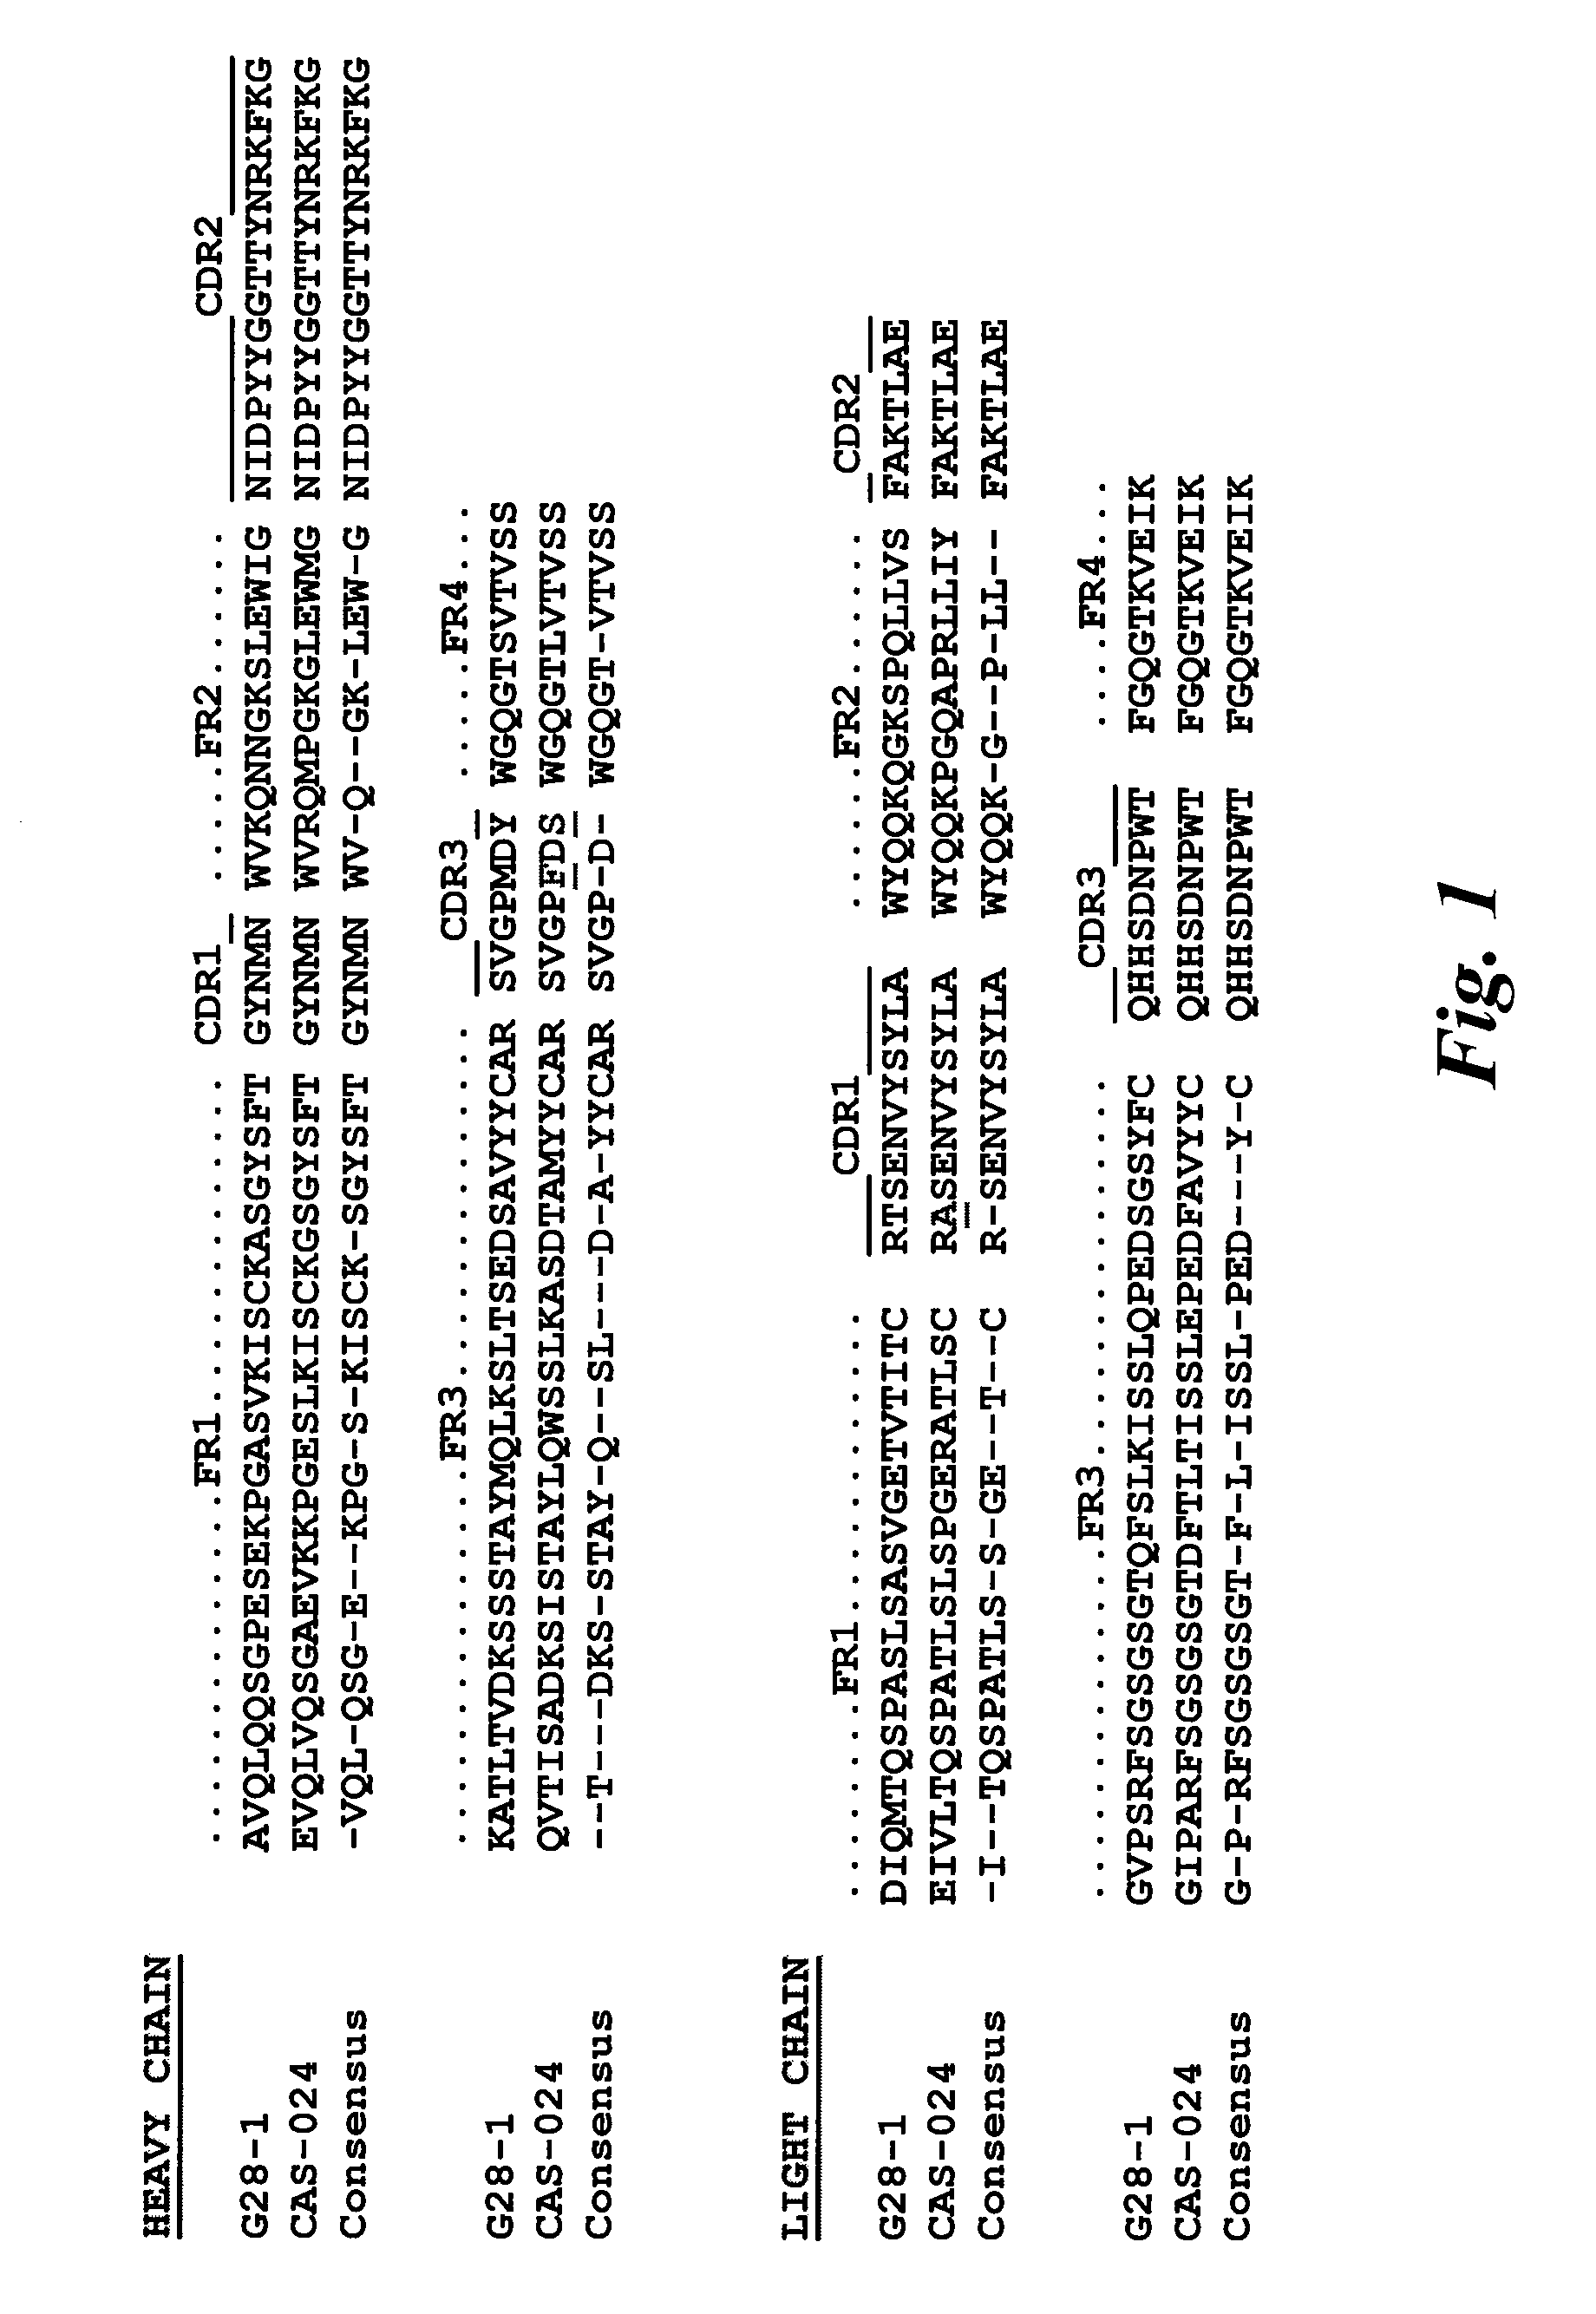 Cd37 immunotherapeutic and combination with bifunctional chemotherapeutic thereof